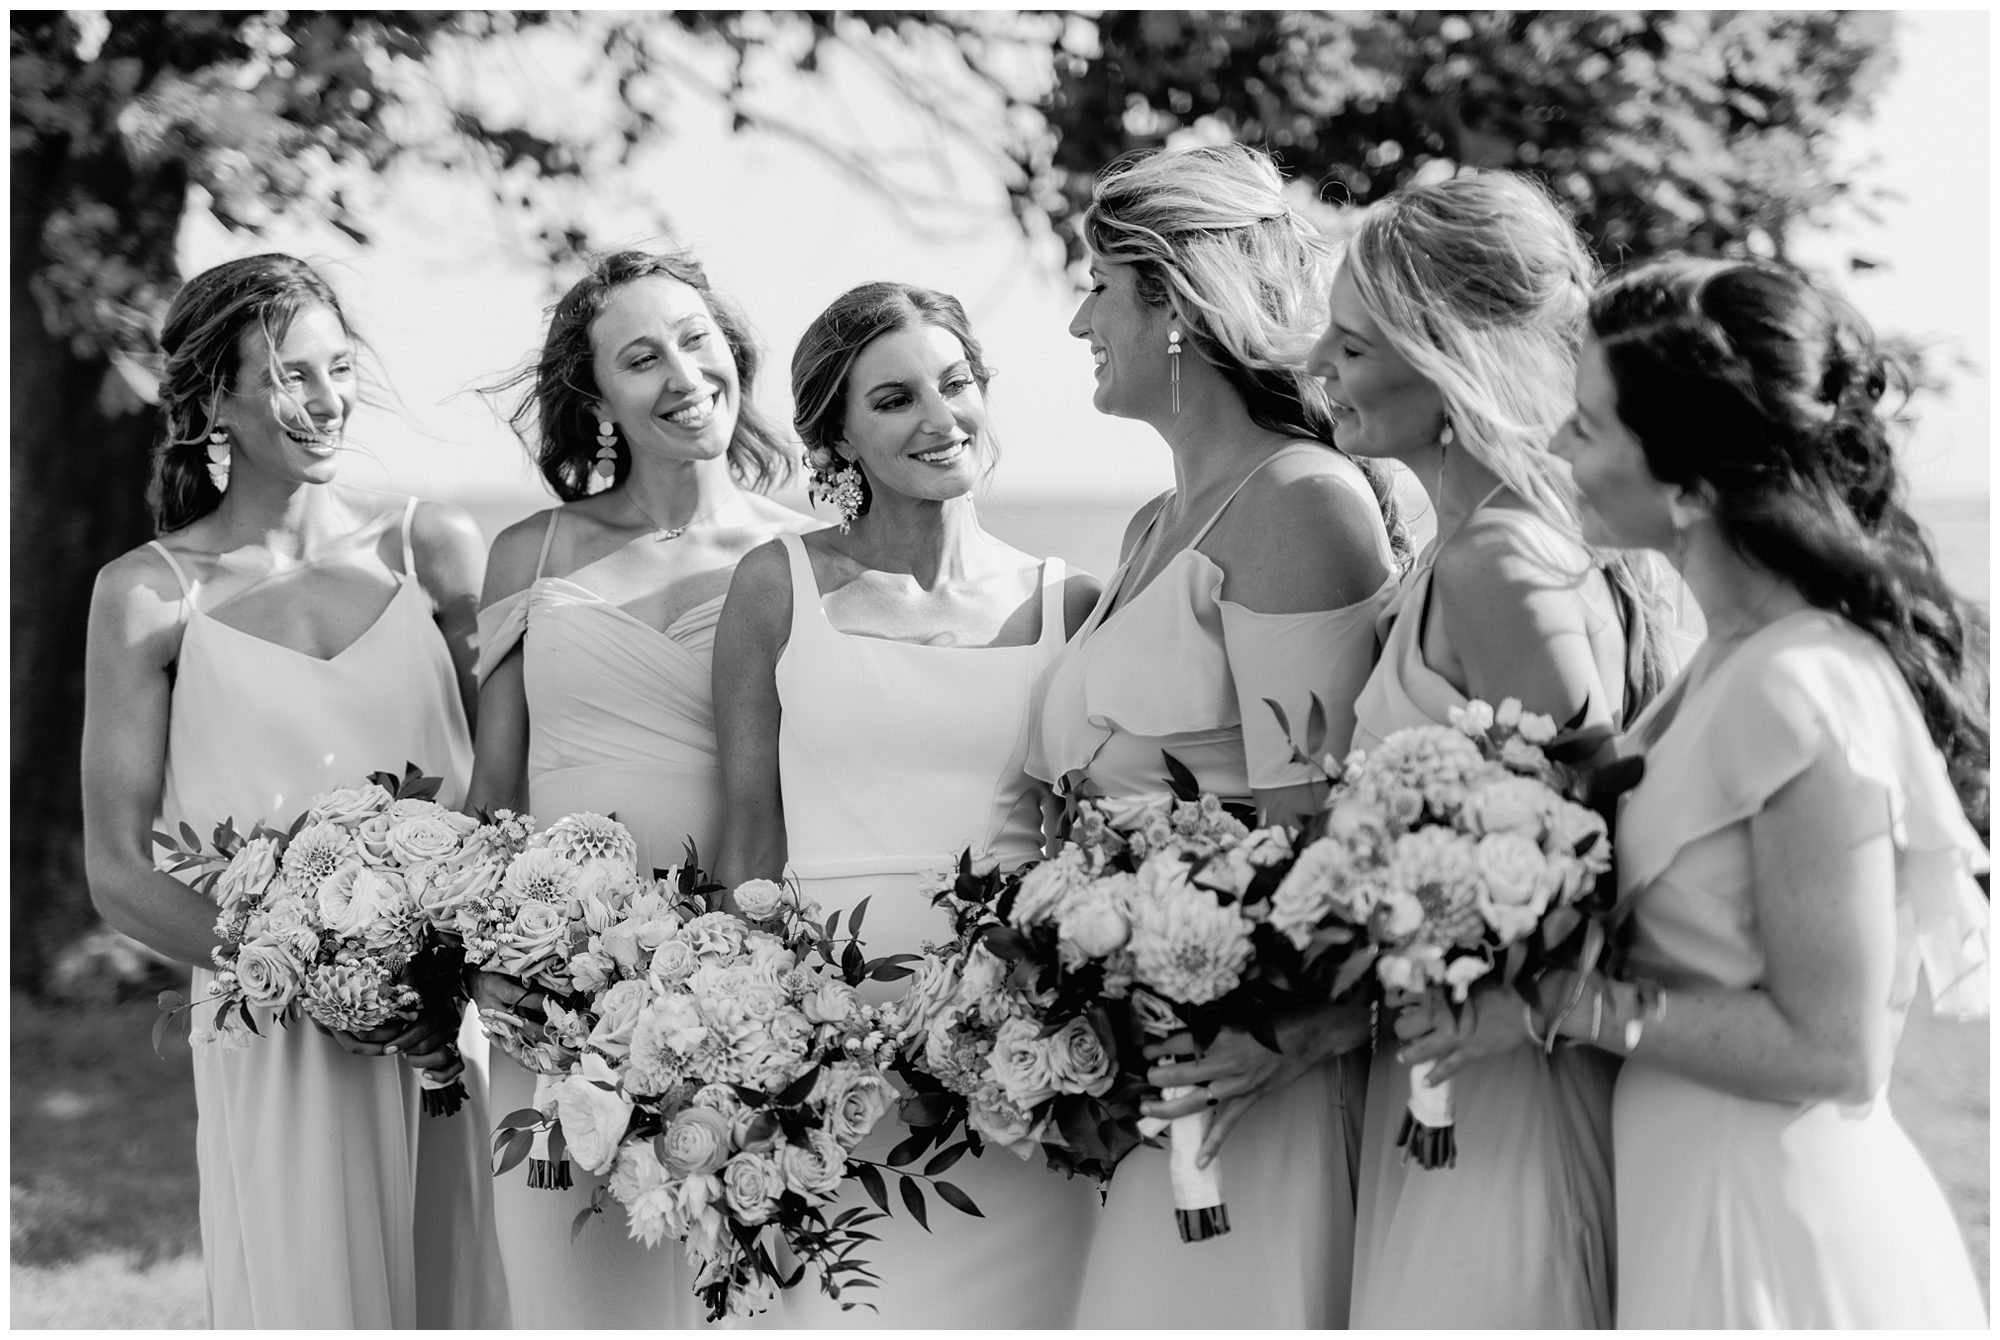 Bridal party photos at Newcastle Commons in Rye, NH.